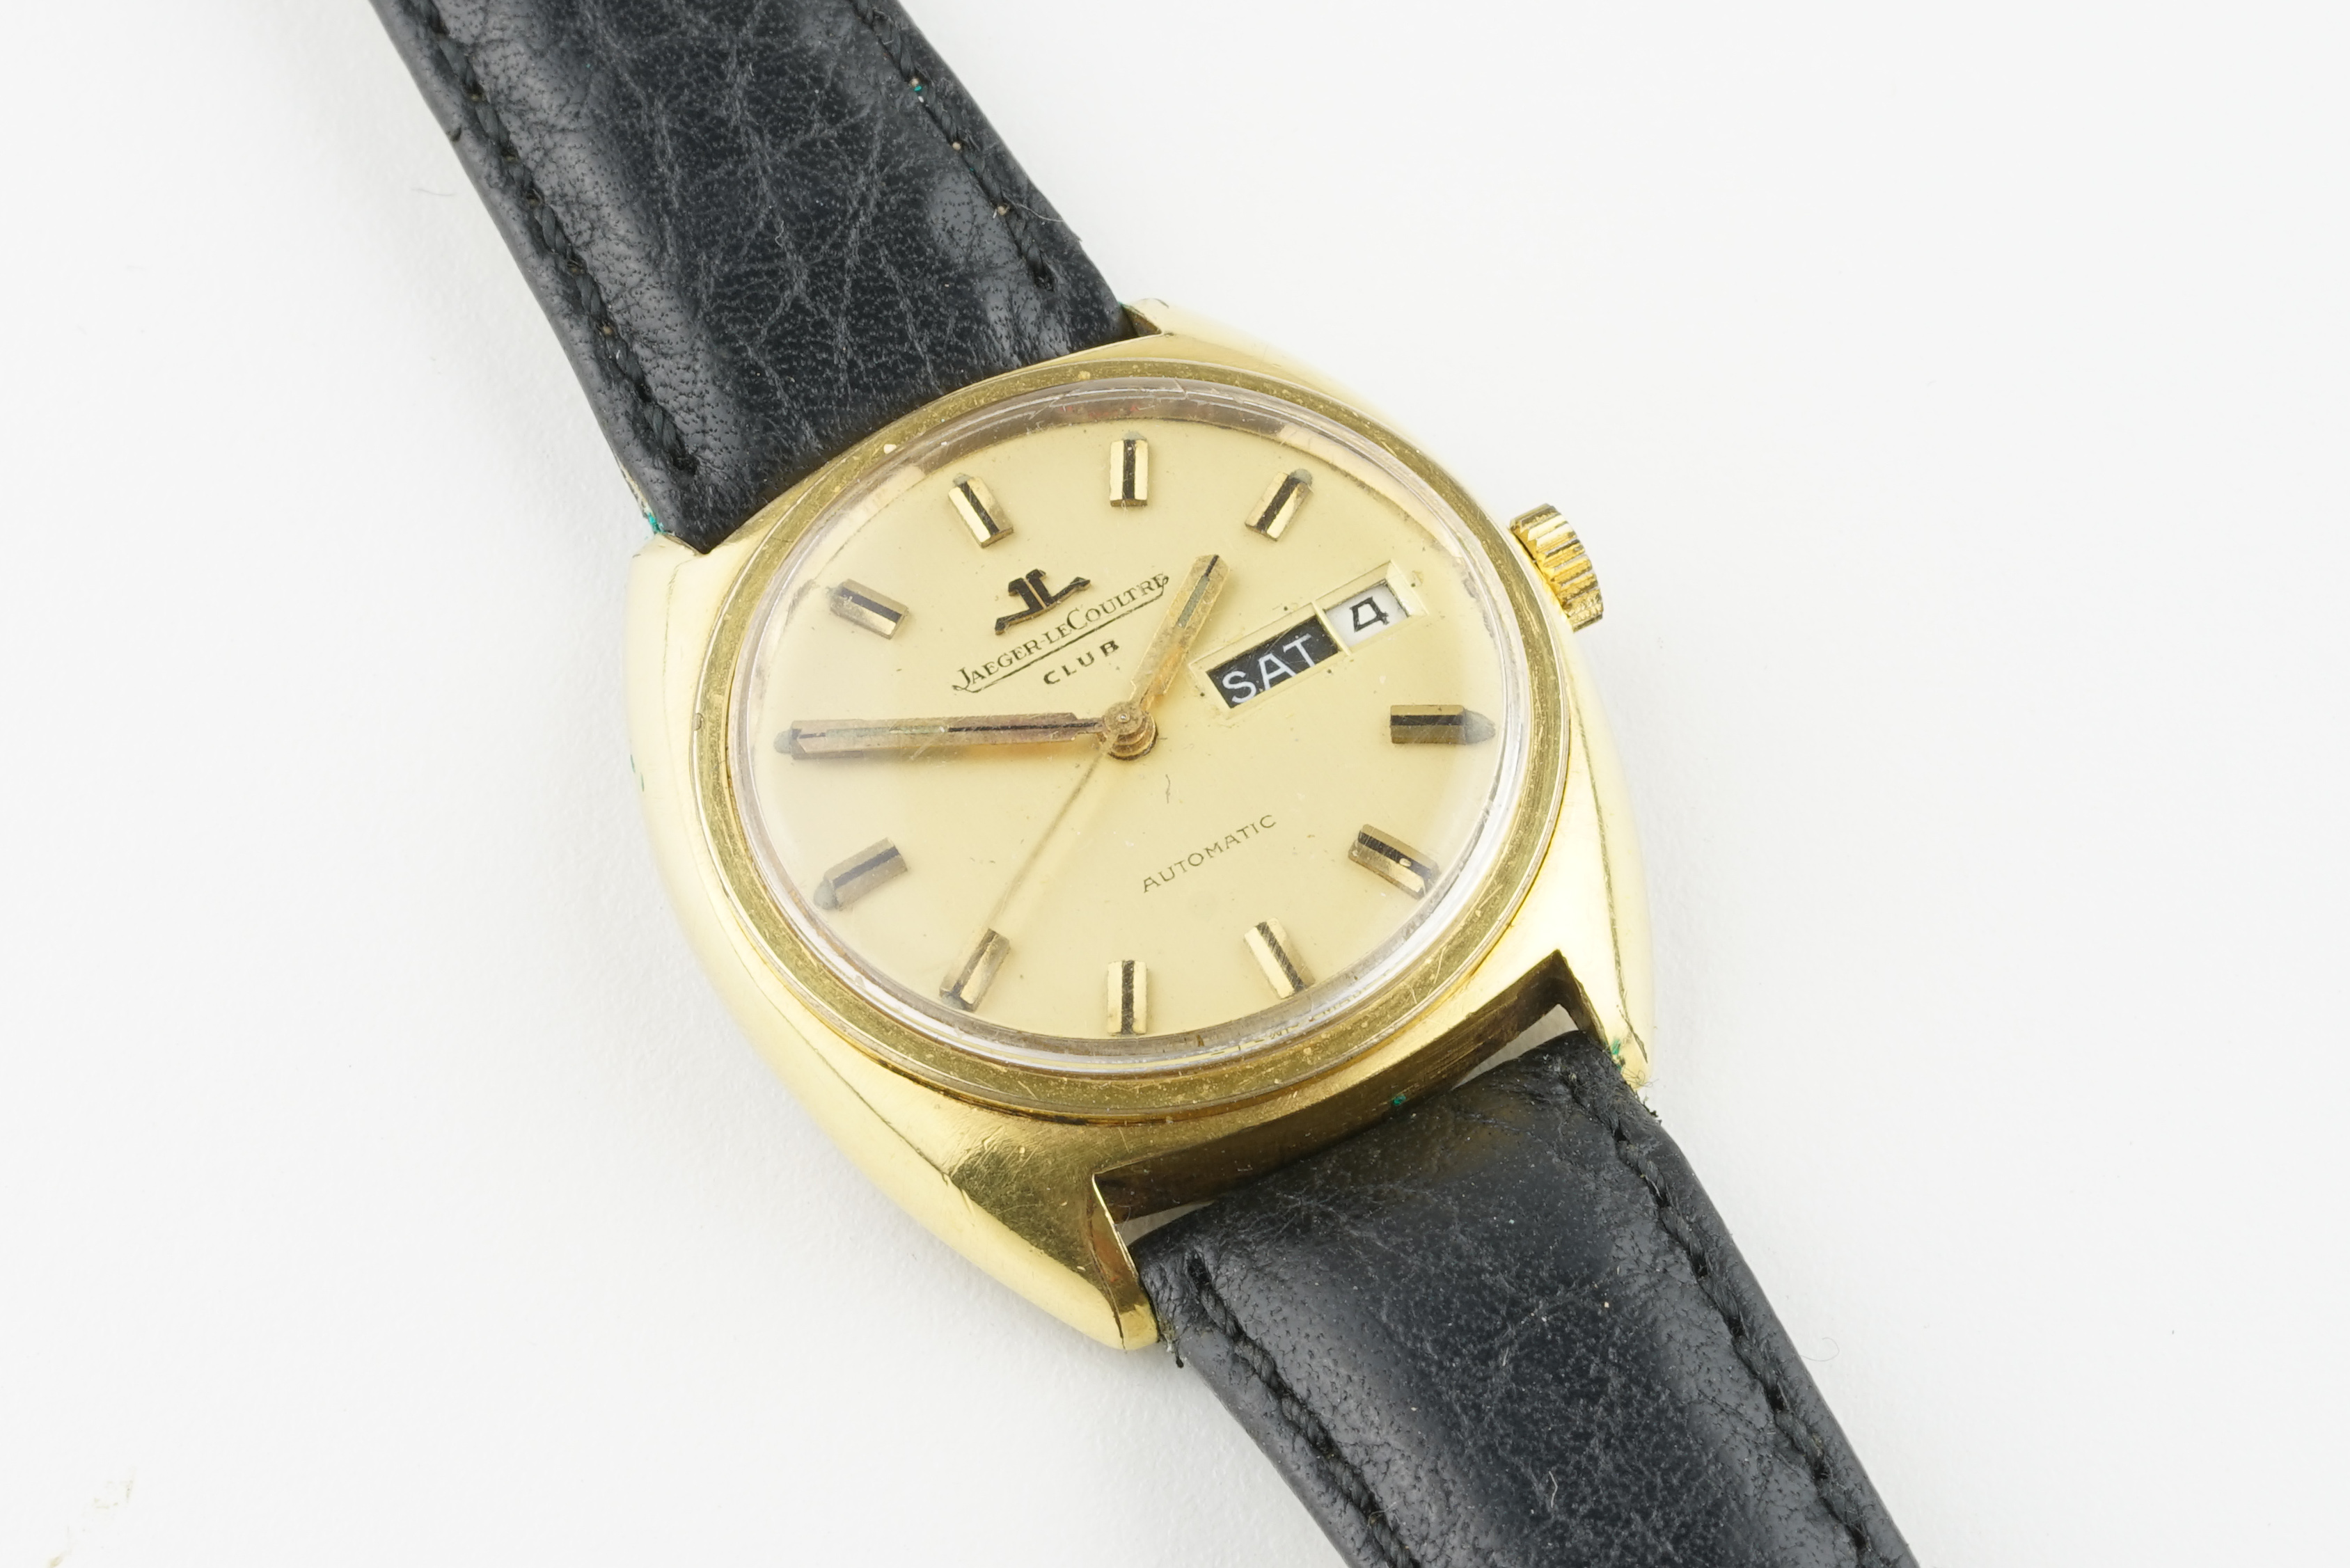 JAEGER LECOULTRE CLUB AUTOMATIC DAY DATE WRISTWATCH, circular gold dial with gold hour markers and